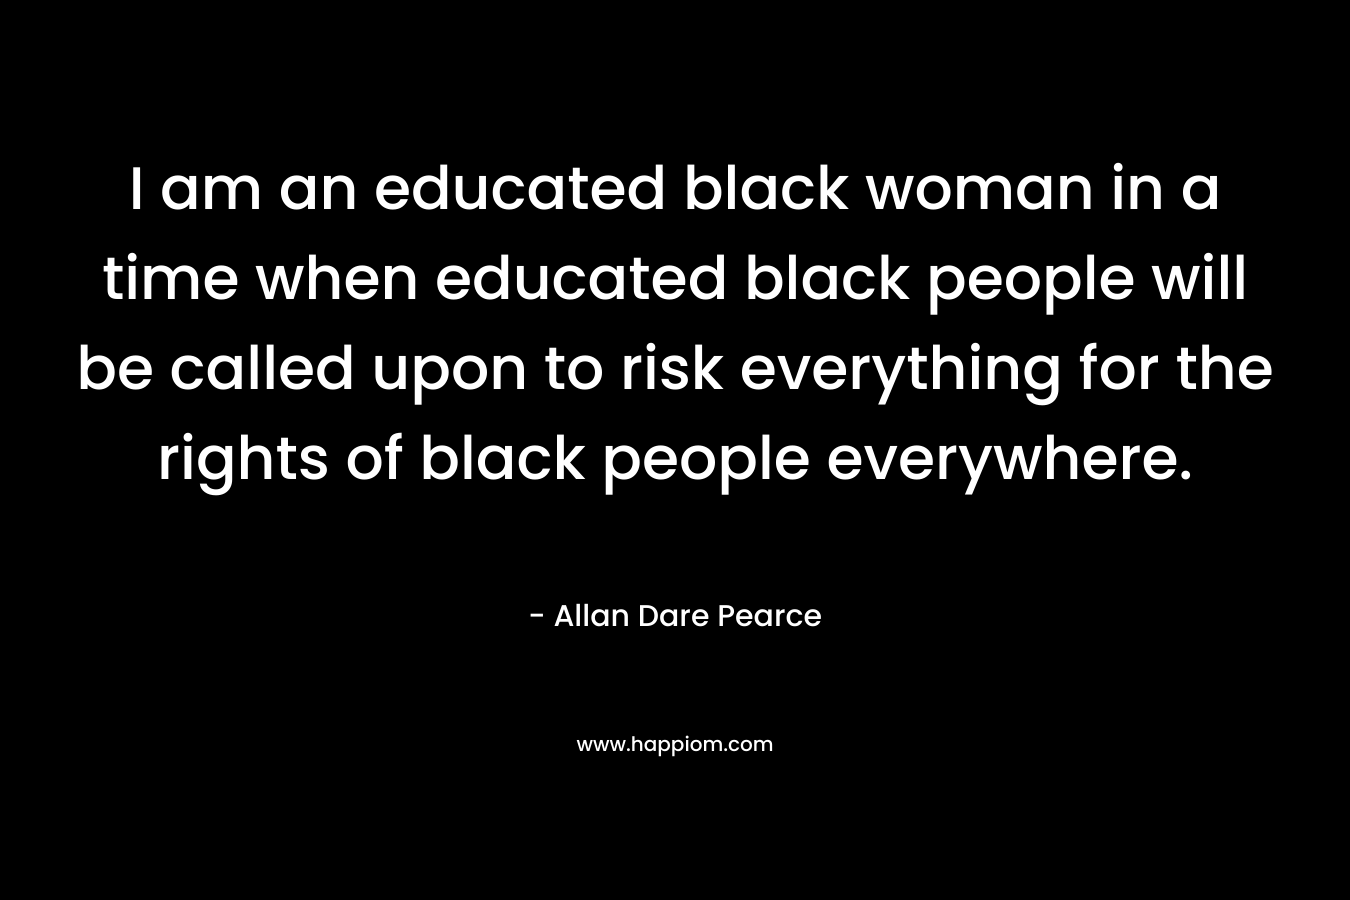 I am an educated black woman in a time when educated black people will be called upon to risk everything for the rights of black people everywhere.